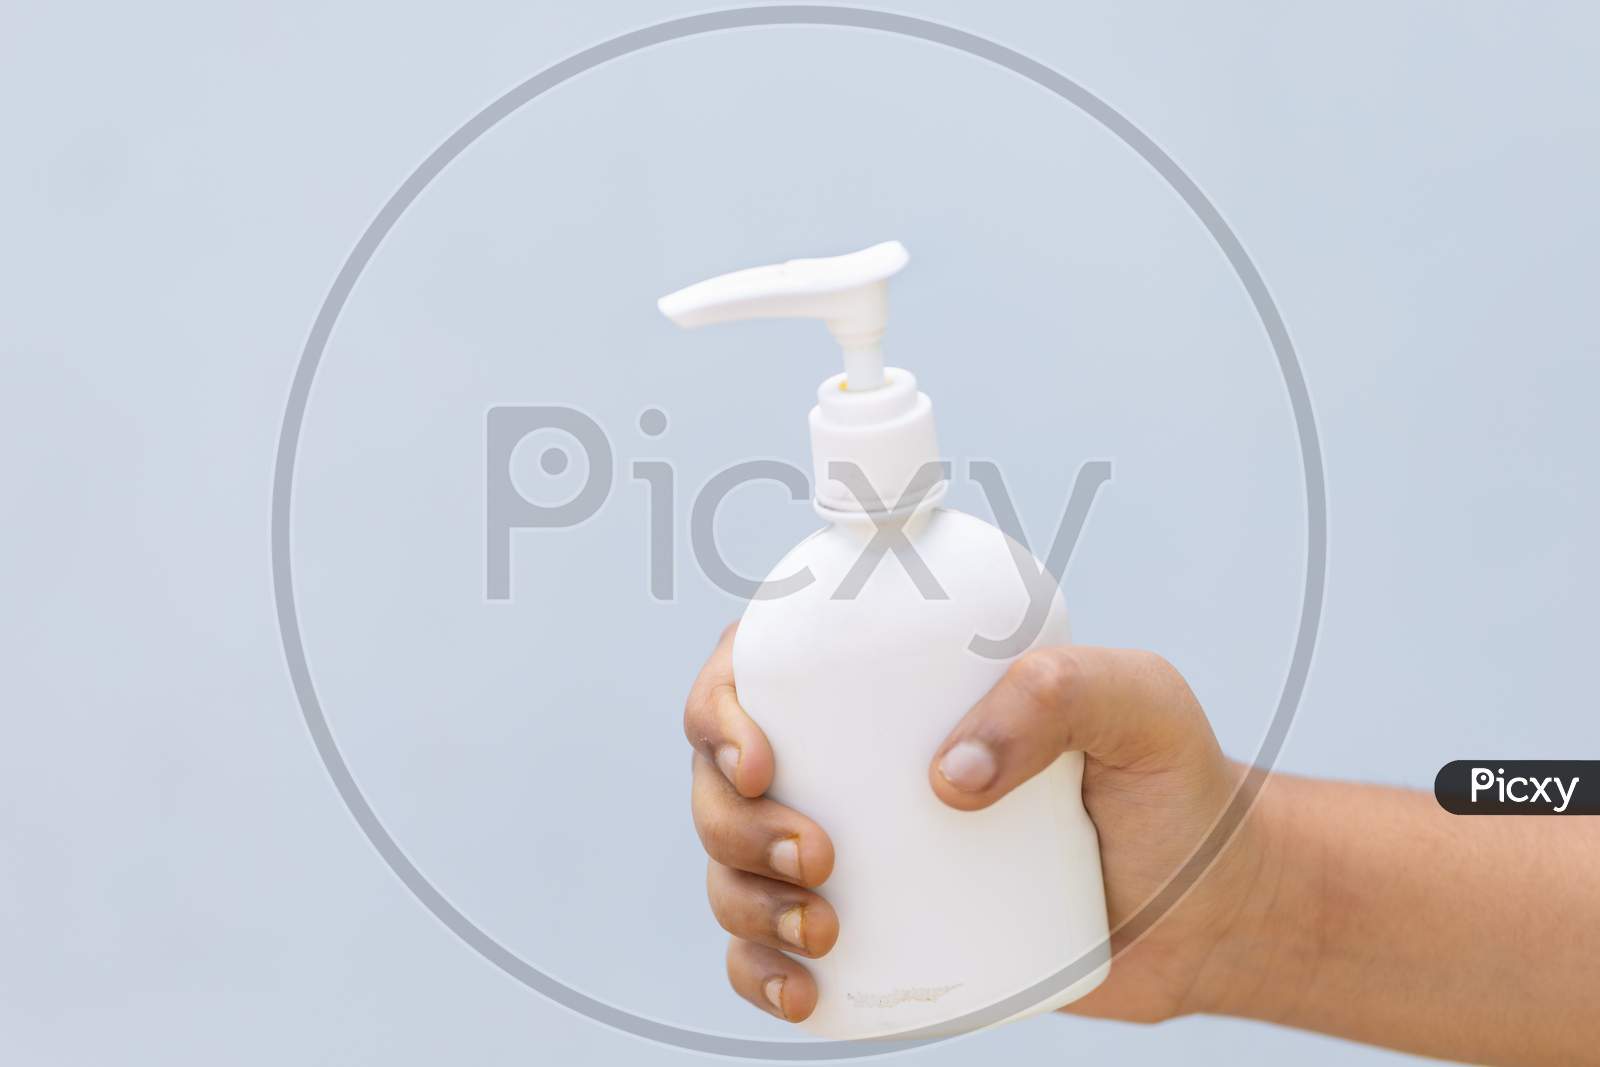 Child'S Hand With Disinfectant Hand Sanitizer Against Plain Background